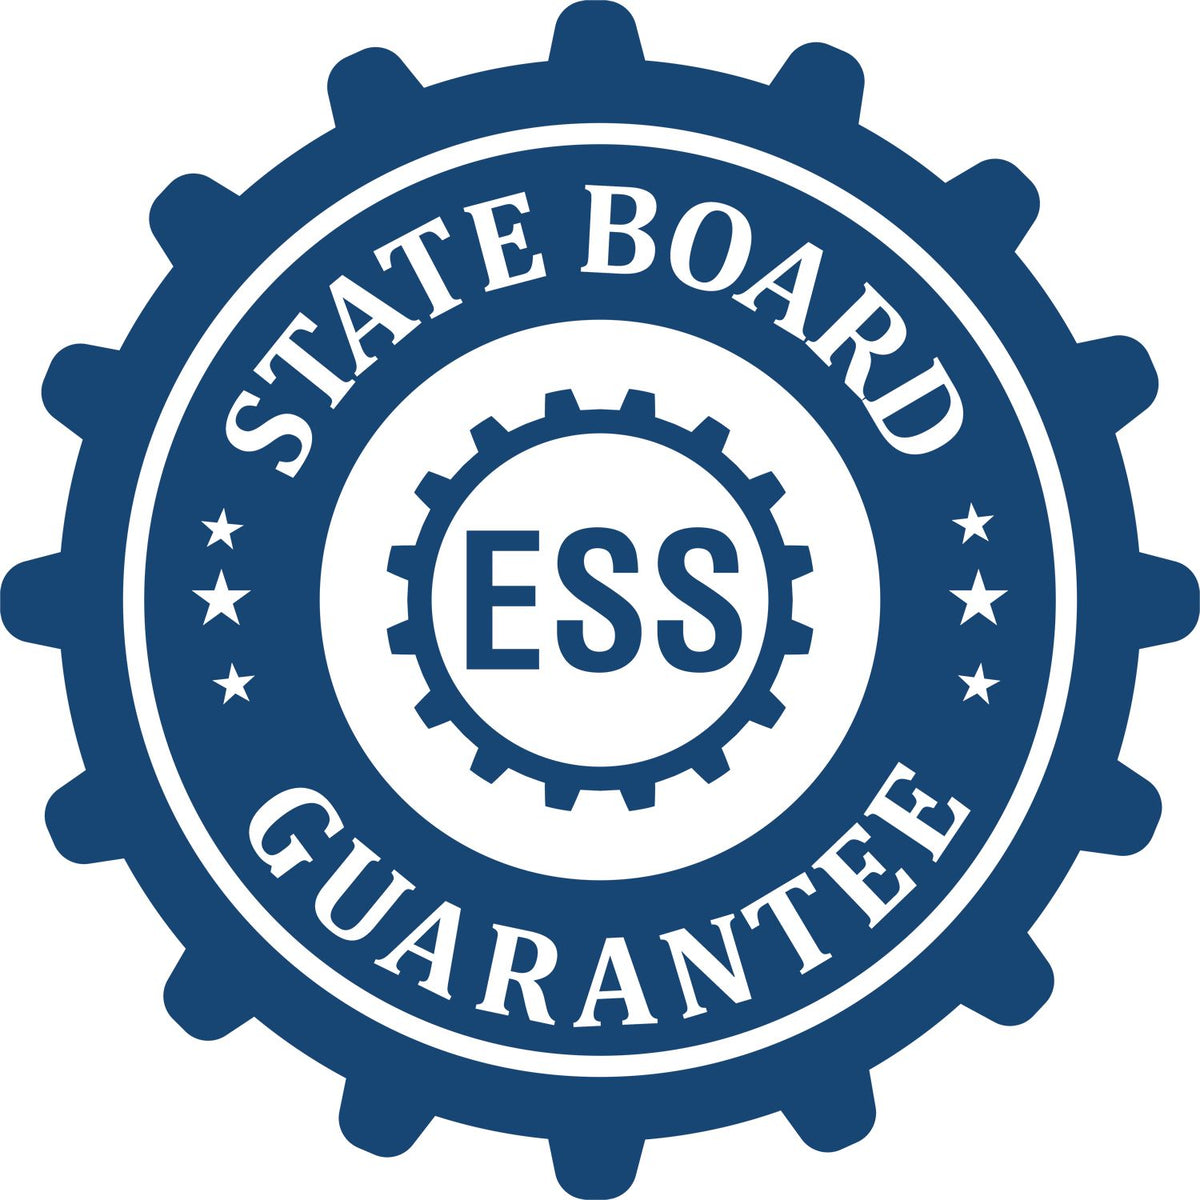 An emblem in a gear shape illustrating a state board guarantee for the Arizona Geologist Desk Seal